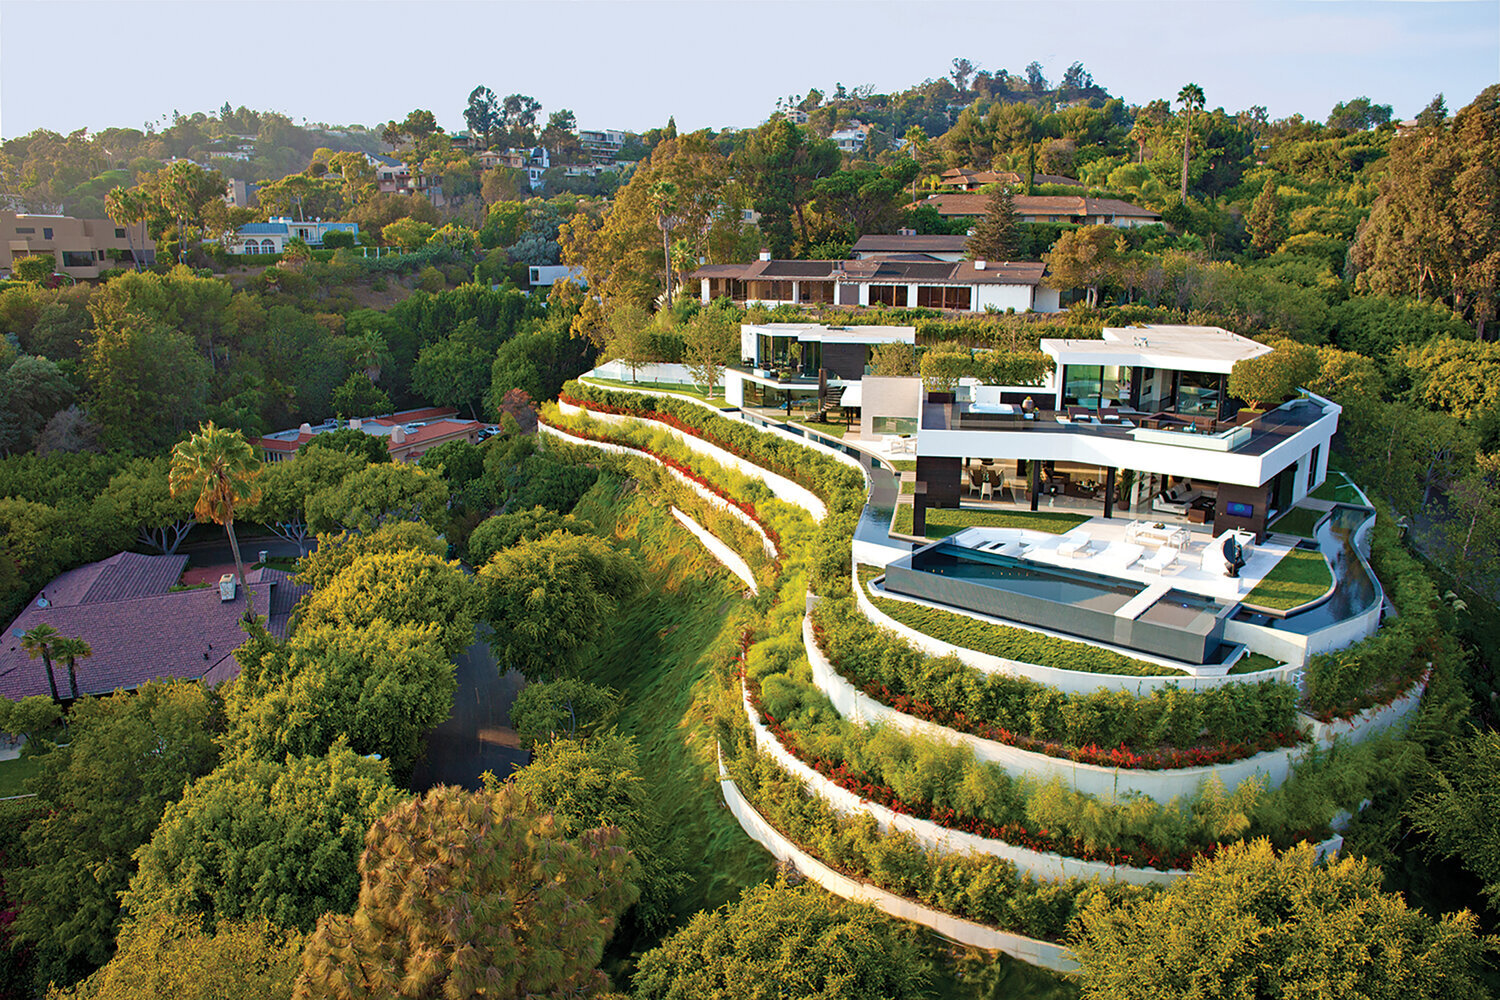 luxury resort style homes designed for the views | modern design blog |  whipple russell architects